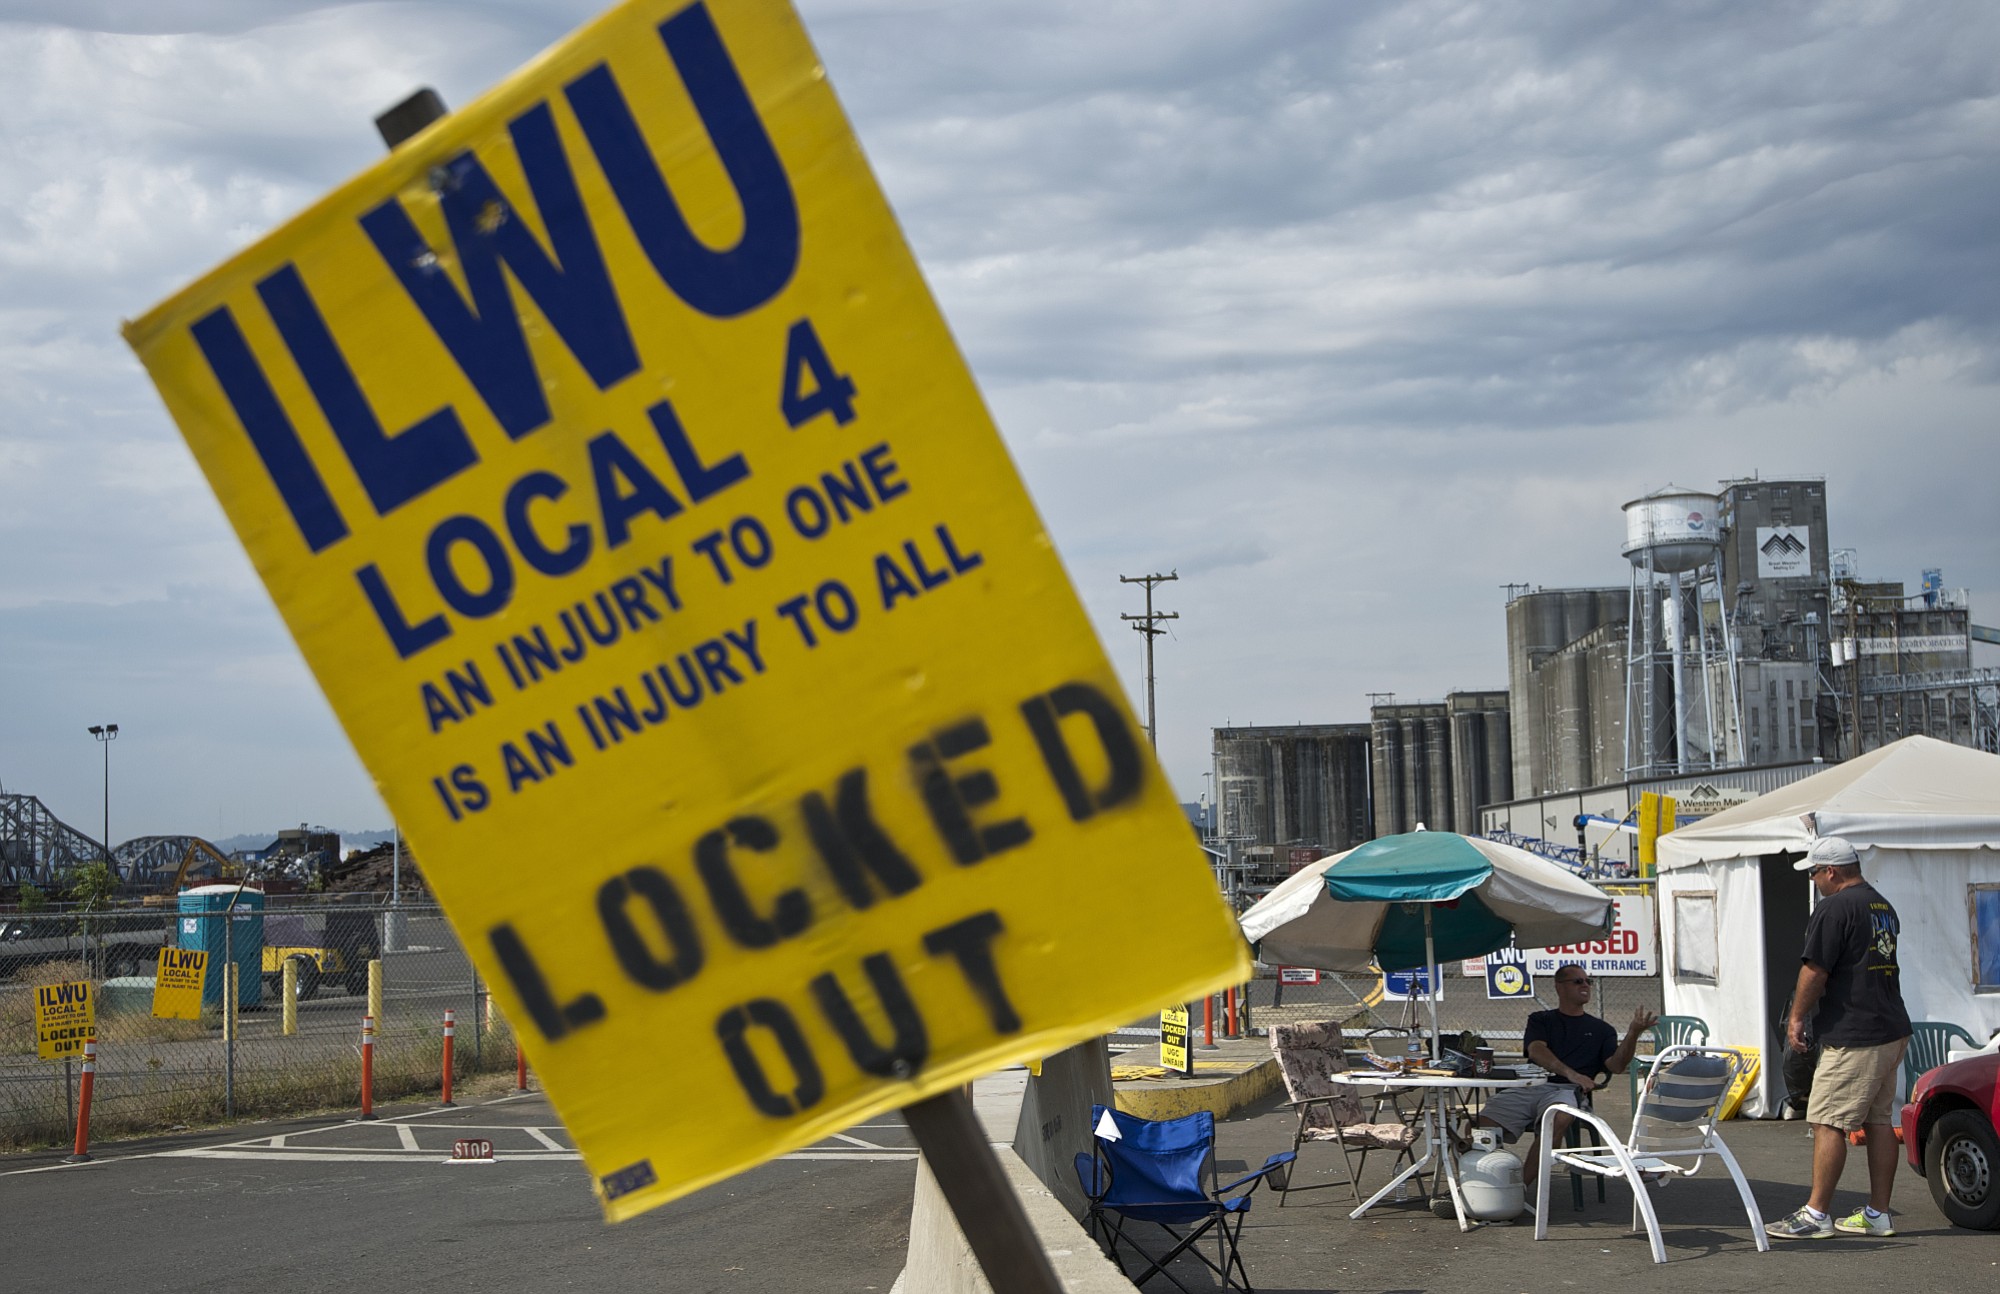 ILWU Local 4 members remain outside the United Grain terminal, on Tuesday, after word of a tentative agreement has surfaced.